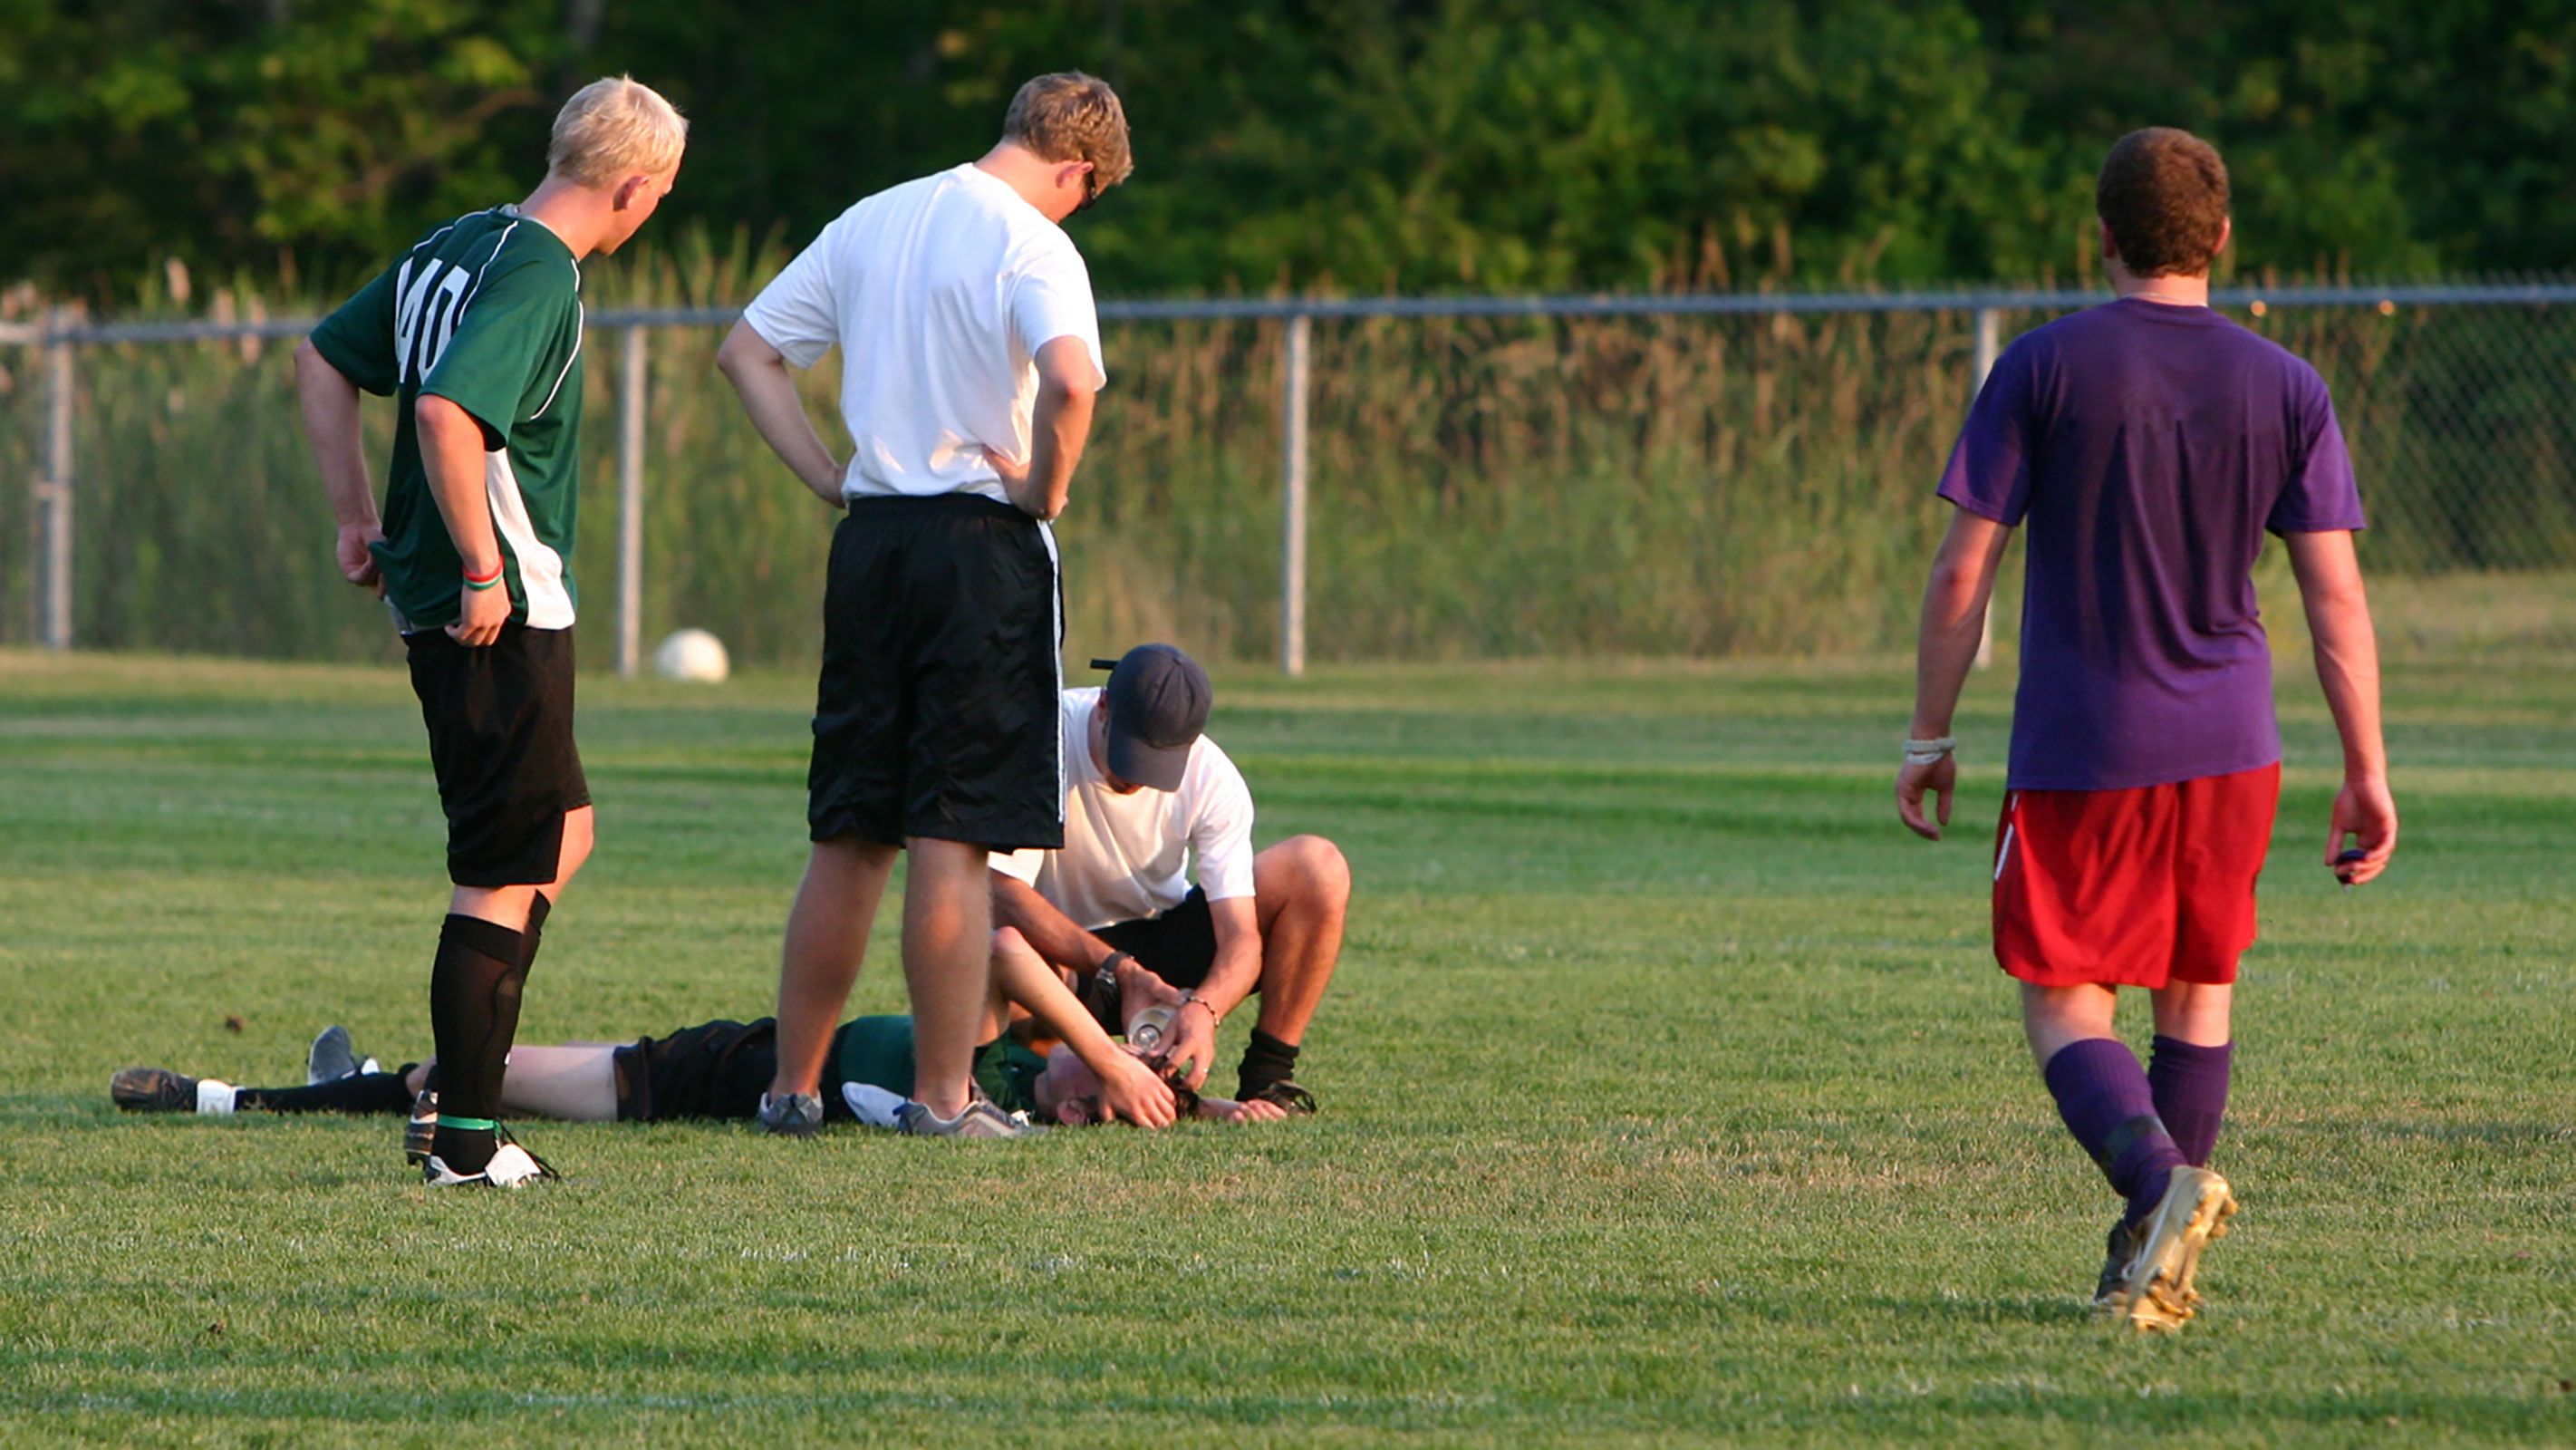 How to Prevent Concussions for Every High Impact Sport